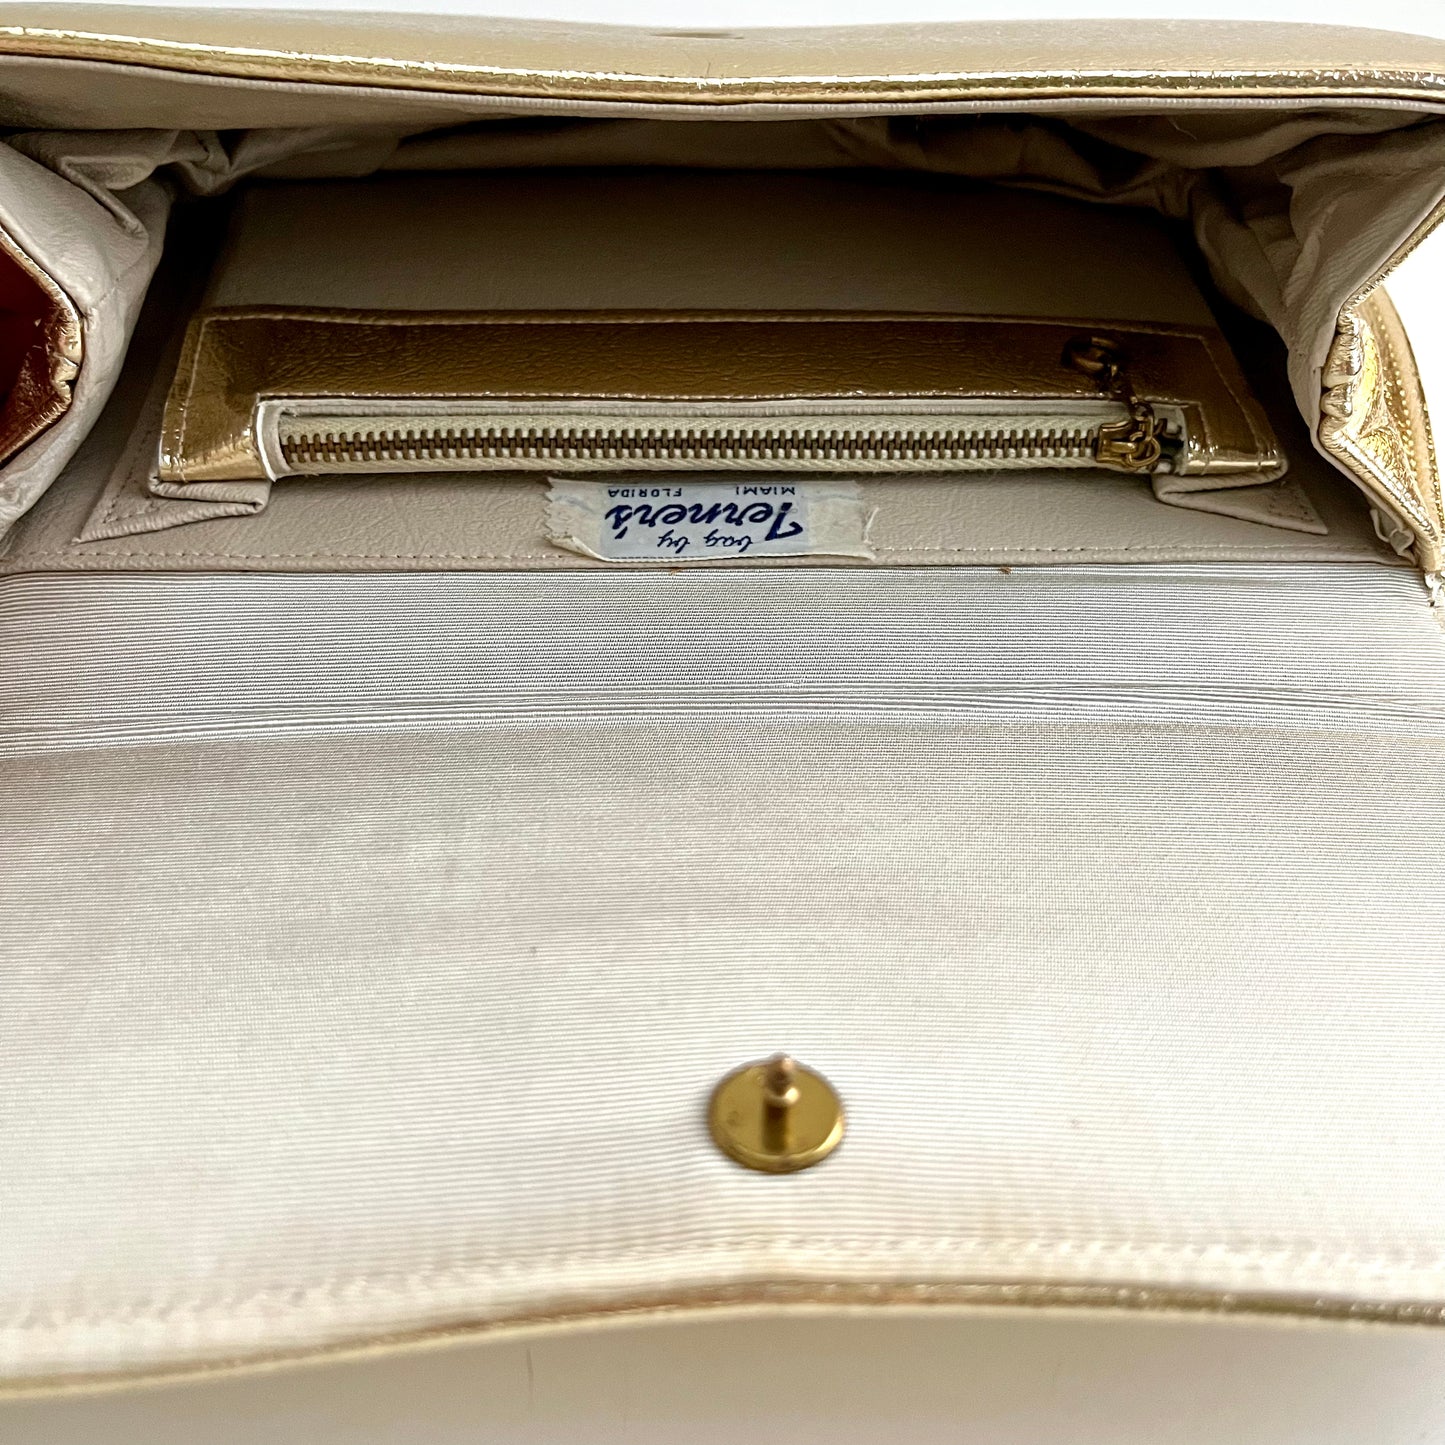 1960s Bag by Terner's Clutch